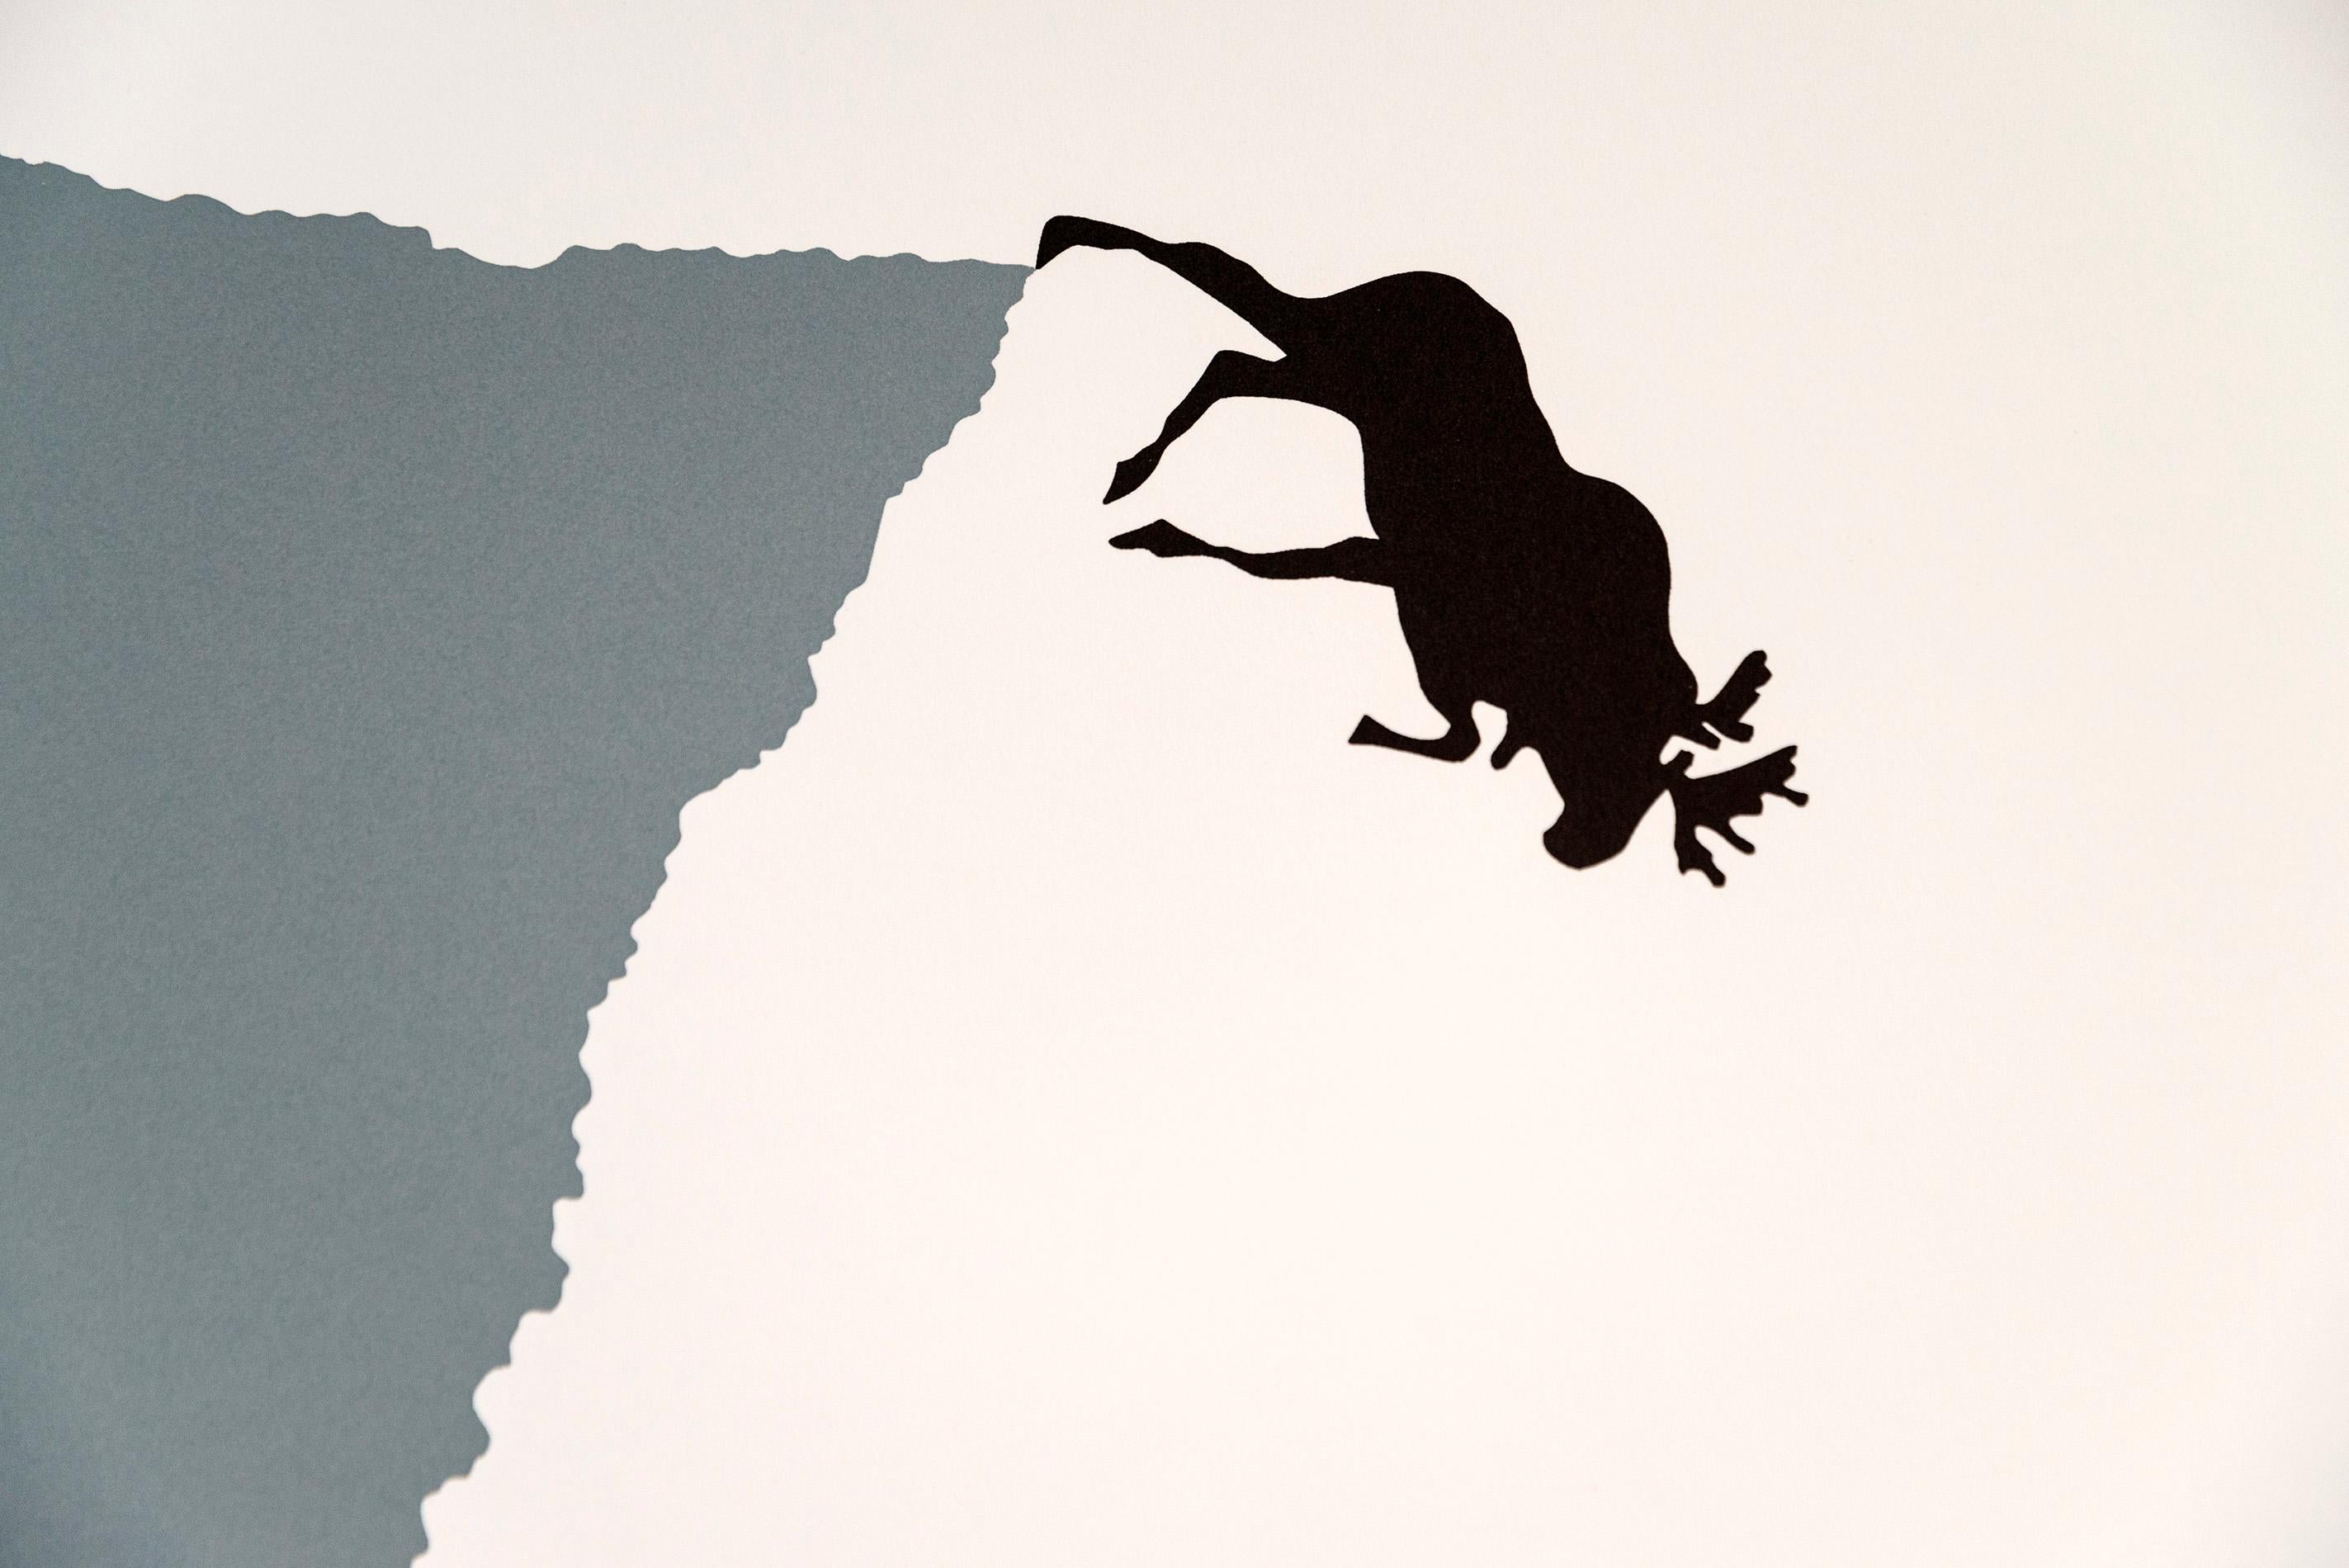 The iconic Canadian image of a moose— ‘the Monarch of the North’ is captured in this early serigraph by Charles Pachter. The black outline of a moose is viewed plunging off a cliff into dark waters below. The backdrop in white, the soft green and